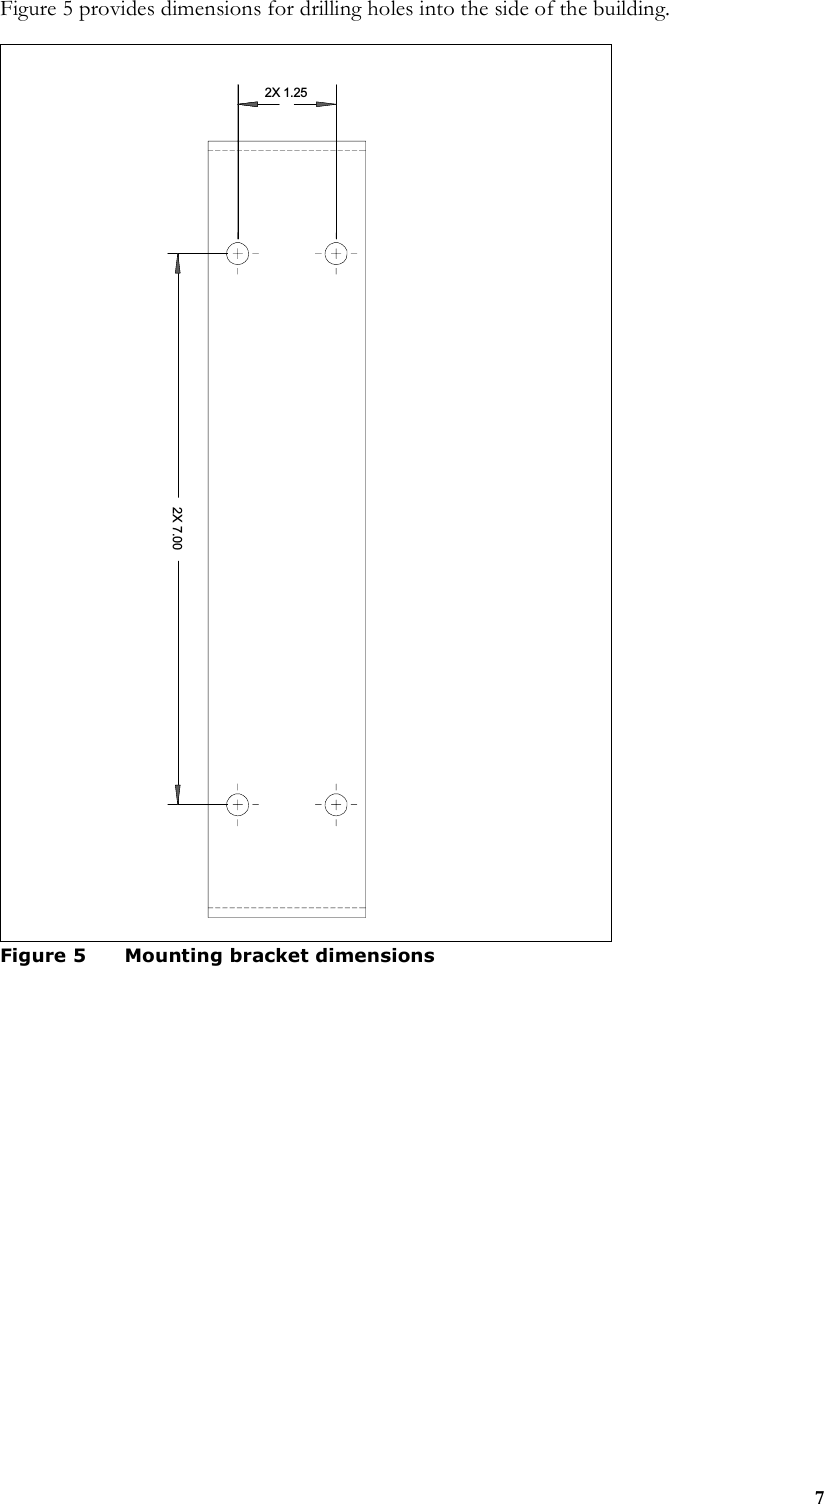 7Figure 5 provides dimensions for drilling holes into the side of the building.Figure 5 Mounting bracket dimensions2X 1.252X 7.00